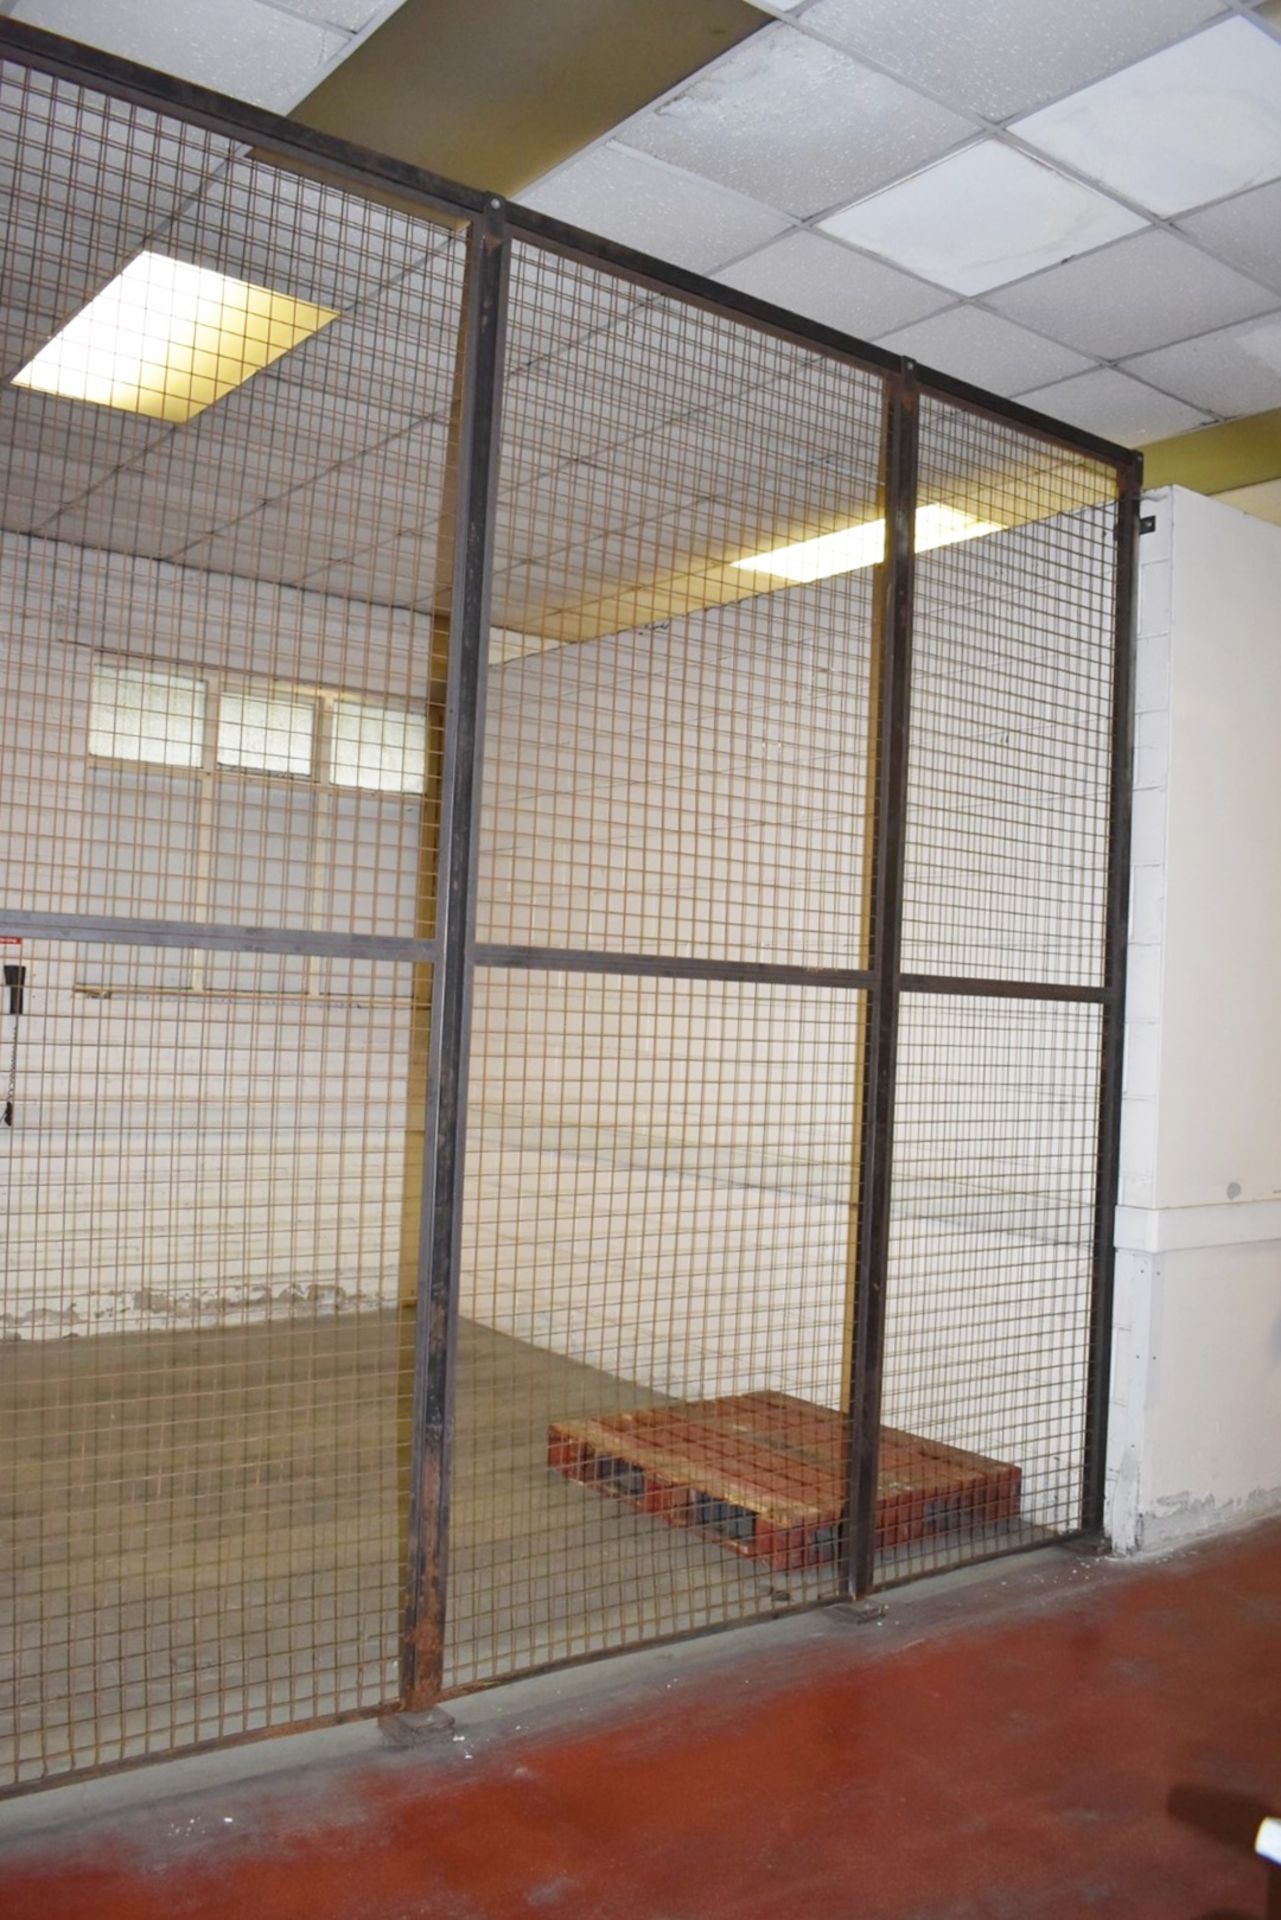 1 x Large Steel Security Cage Fence With Sliding Door - H330 x W1040 cms - Ideal For Securely - Image 5 of 8